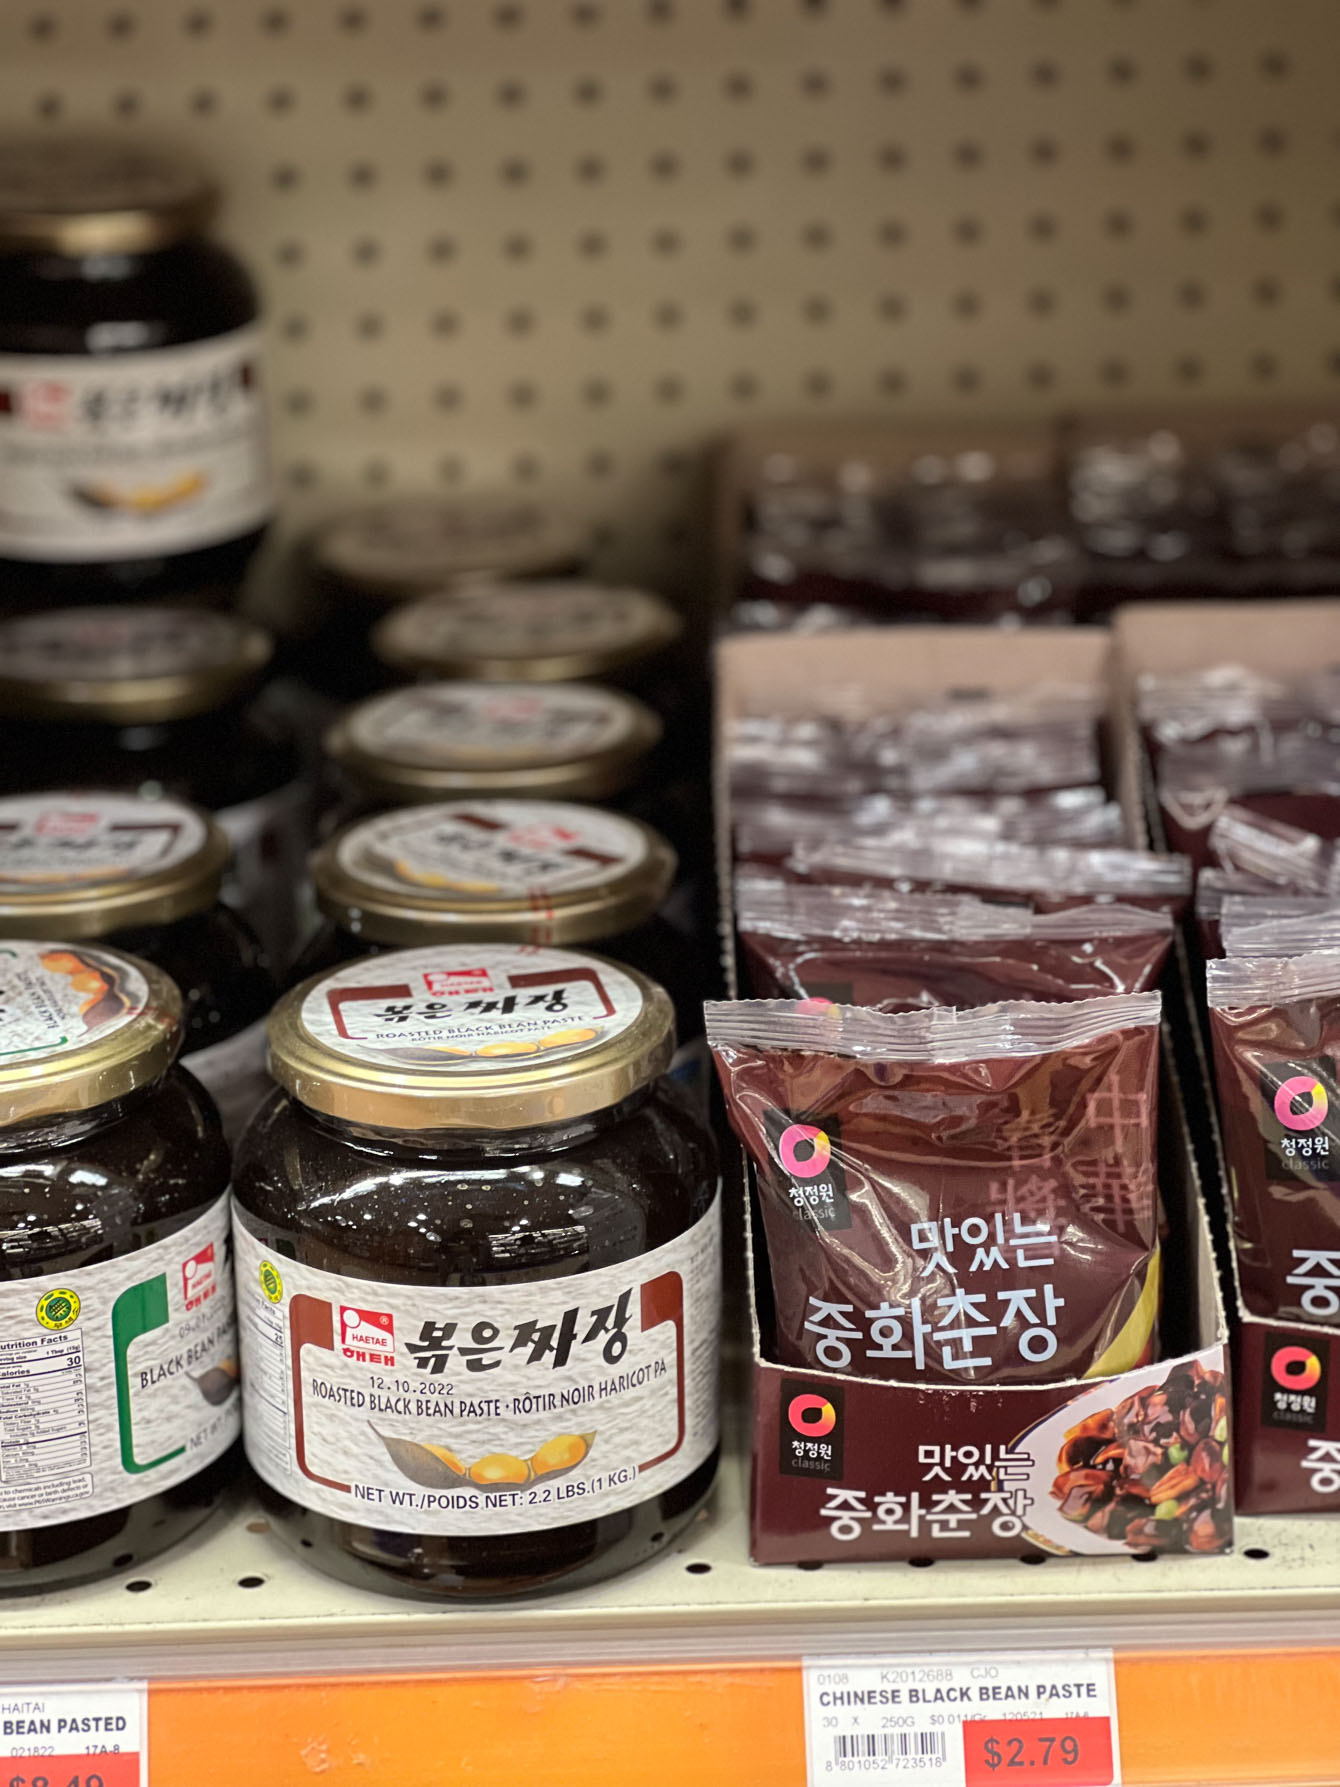 Korean black bean pastes in jars and plastic bags are on the shelf.